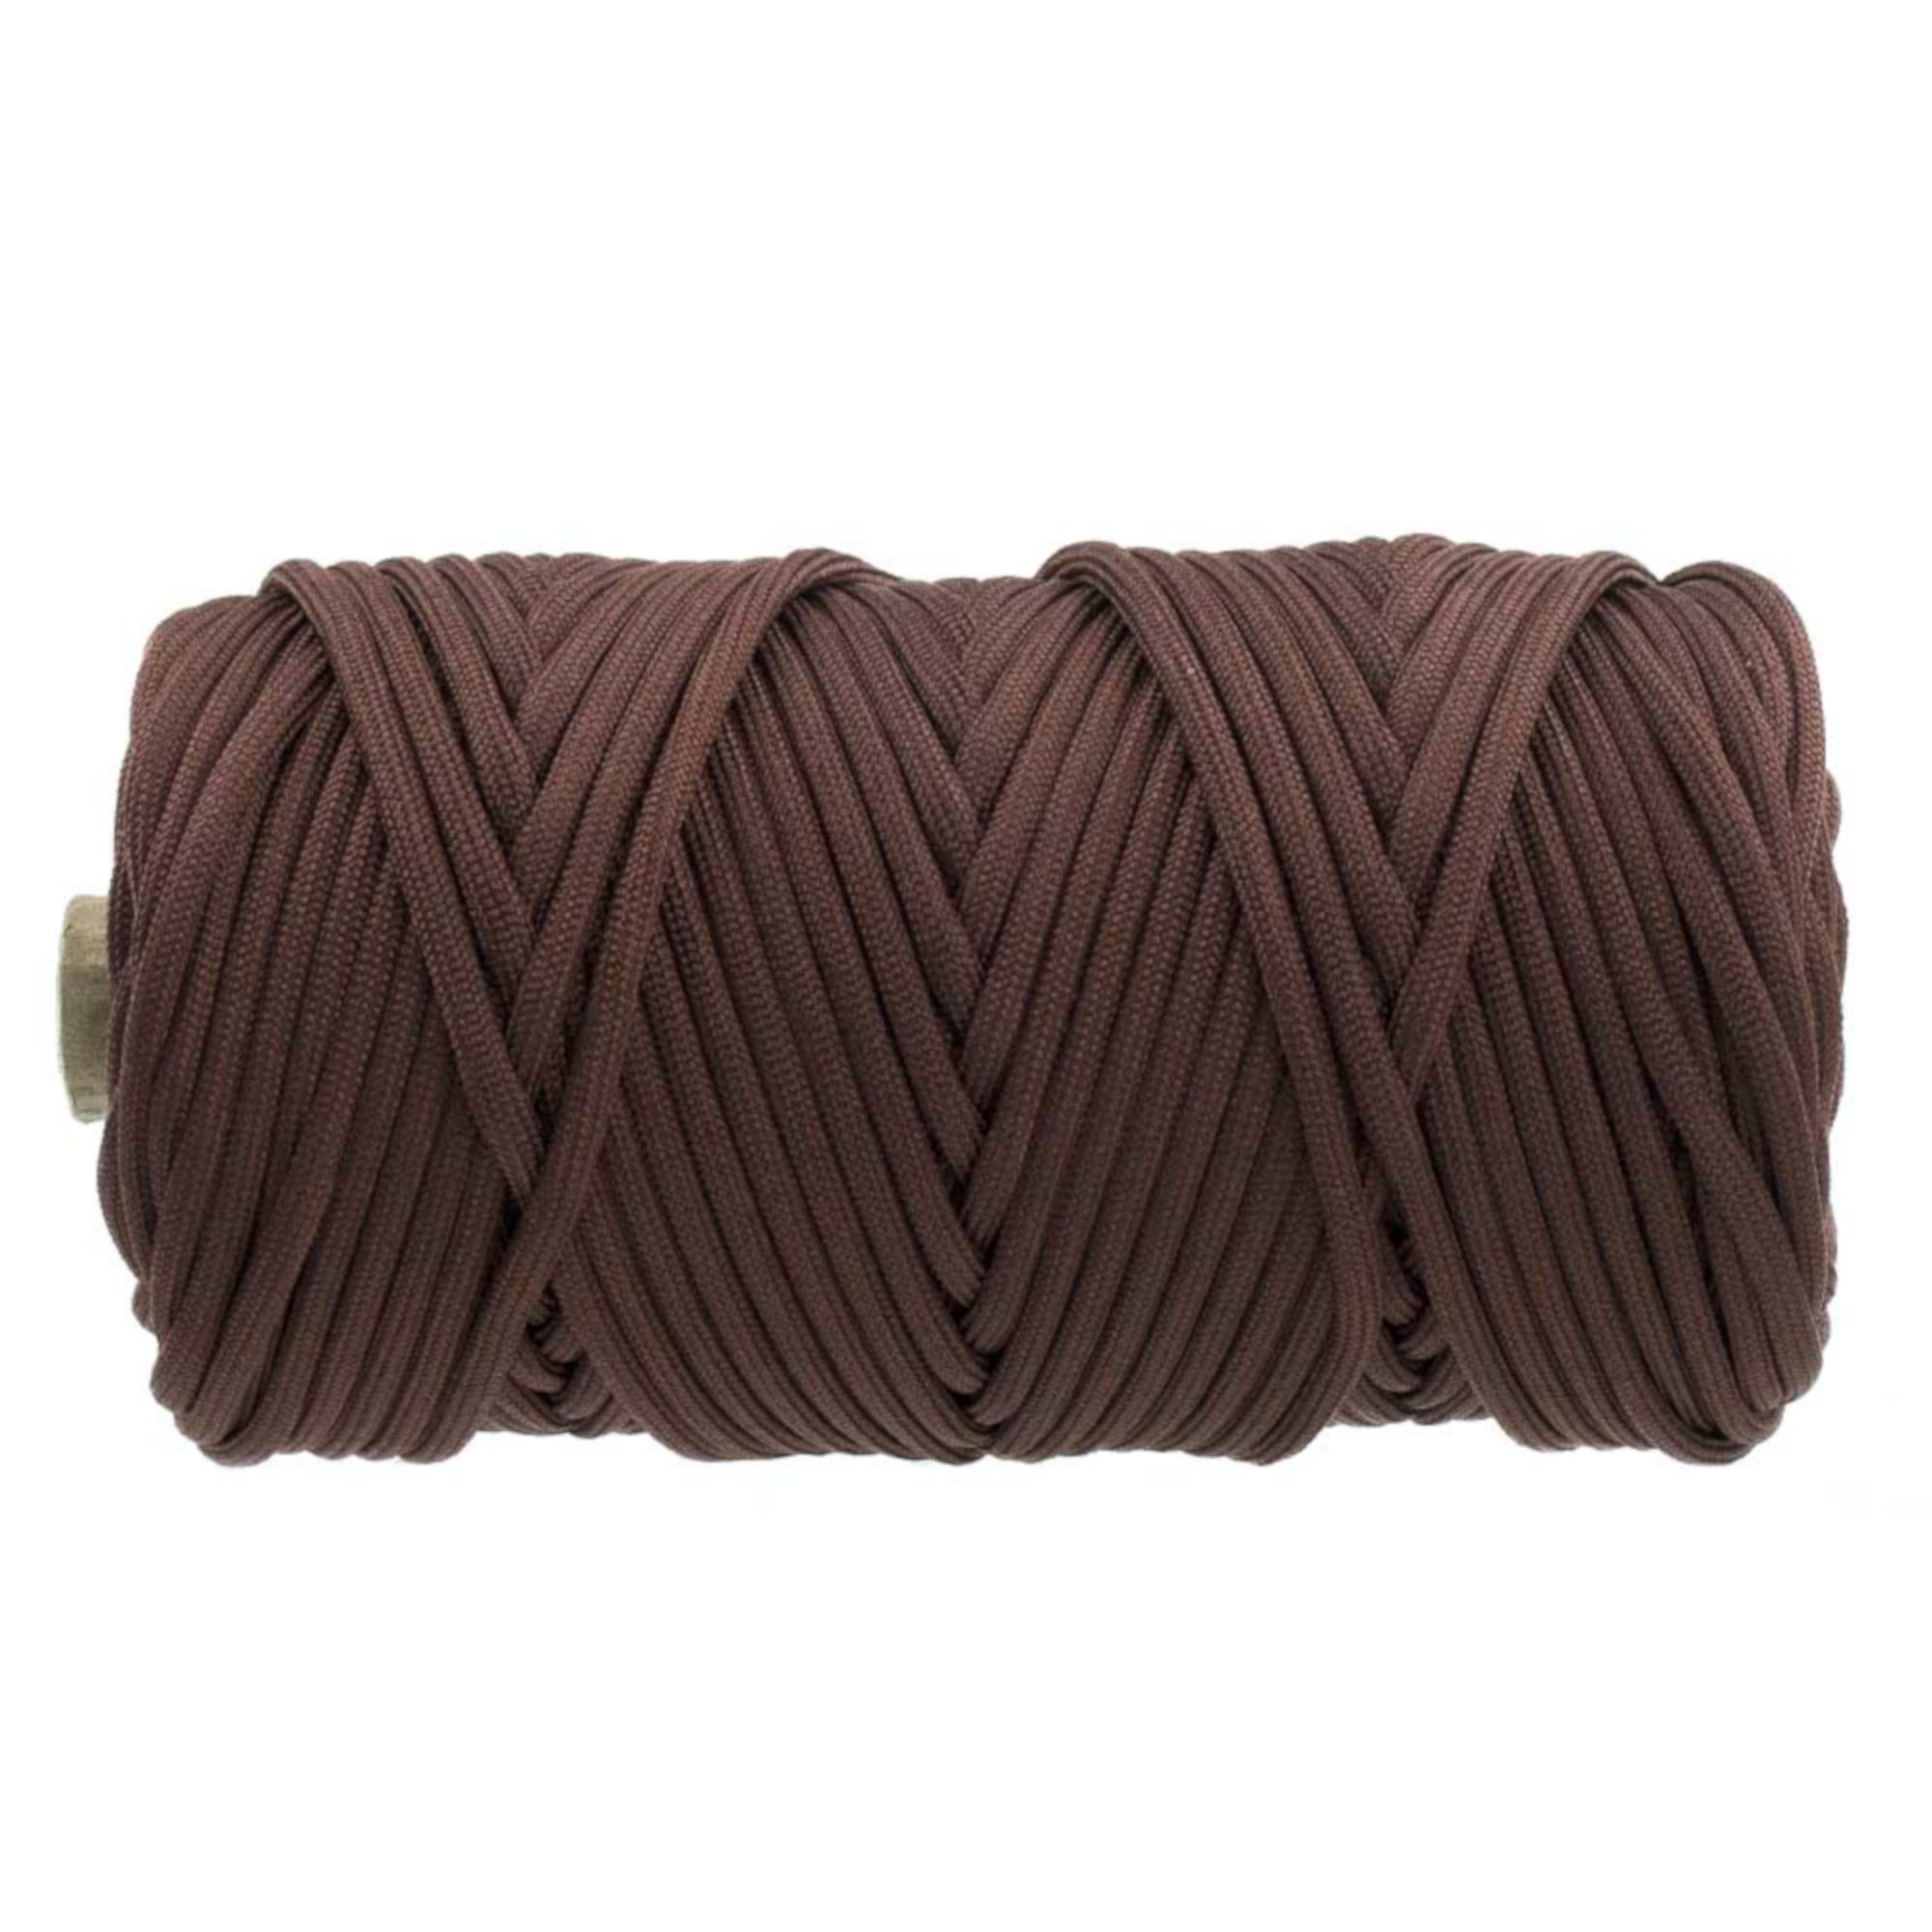 TOUGH-GRID 750lb Grizzly MIl-C-5040-H Coyote Grizzly Brown 200Ft Brown Paracord//Parachute Cord Genuine Mil Spec Type IV 750lb Paracord Used by The US Military - 100/% Nylon